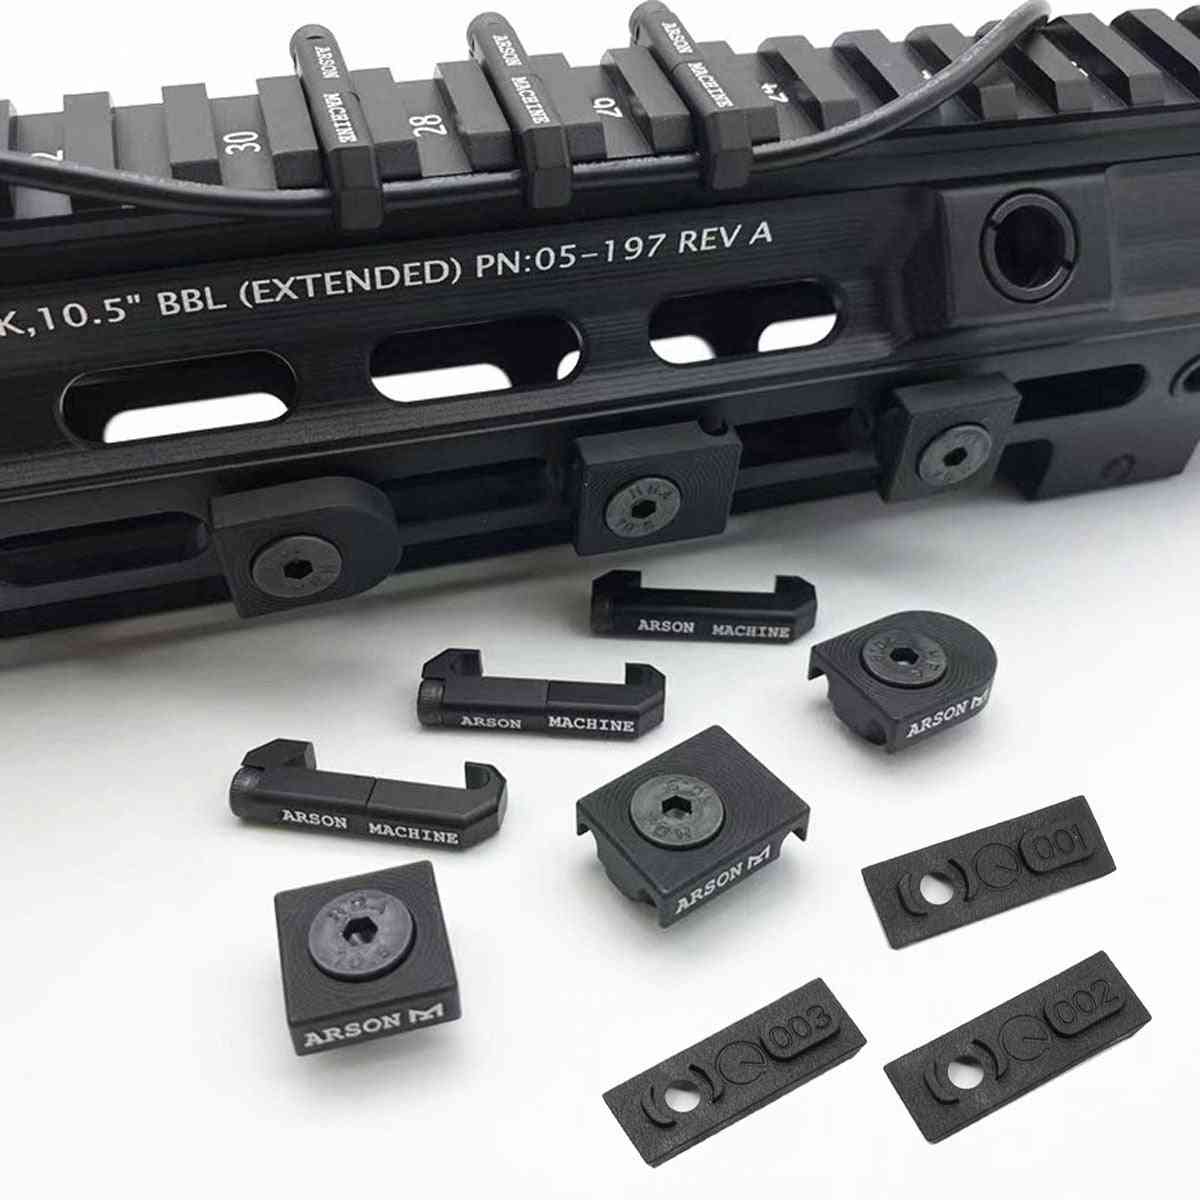 M-lok Keymod Rail Cover Wire Guide System Cable Management